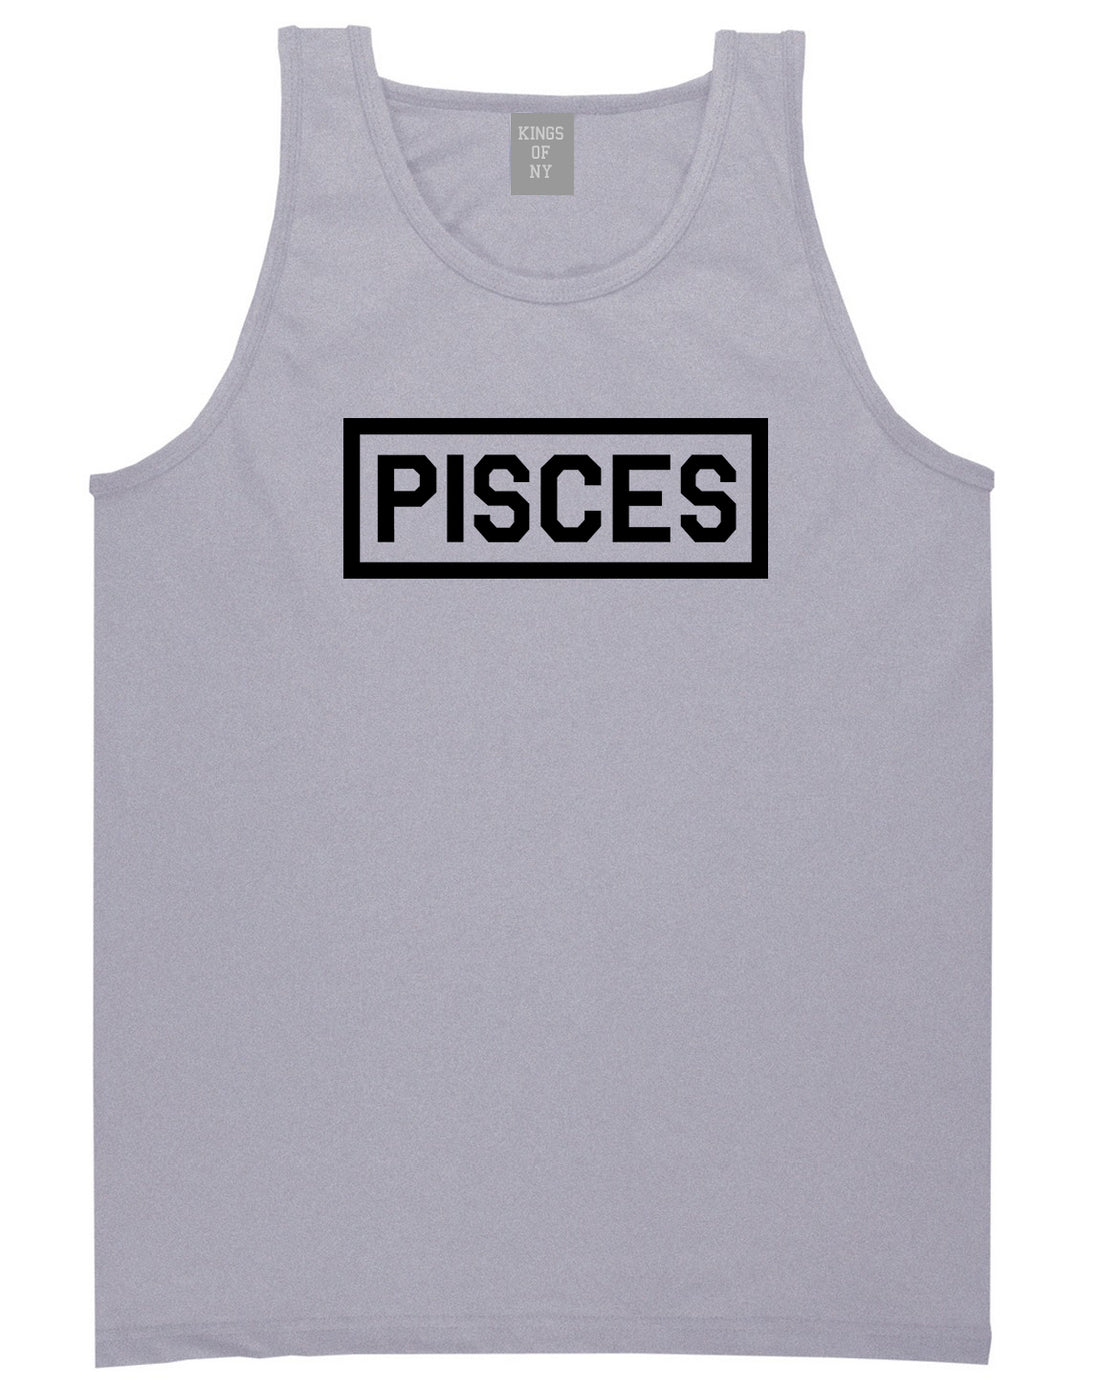 Pisces Horoscope Sign Mens Grey Tank Top Shirt by KINGS OF NY